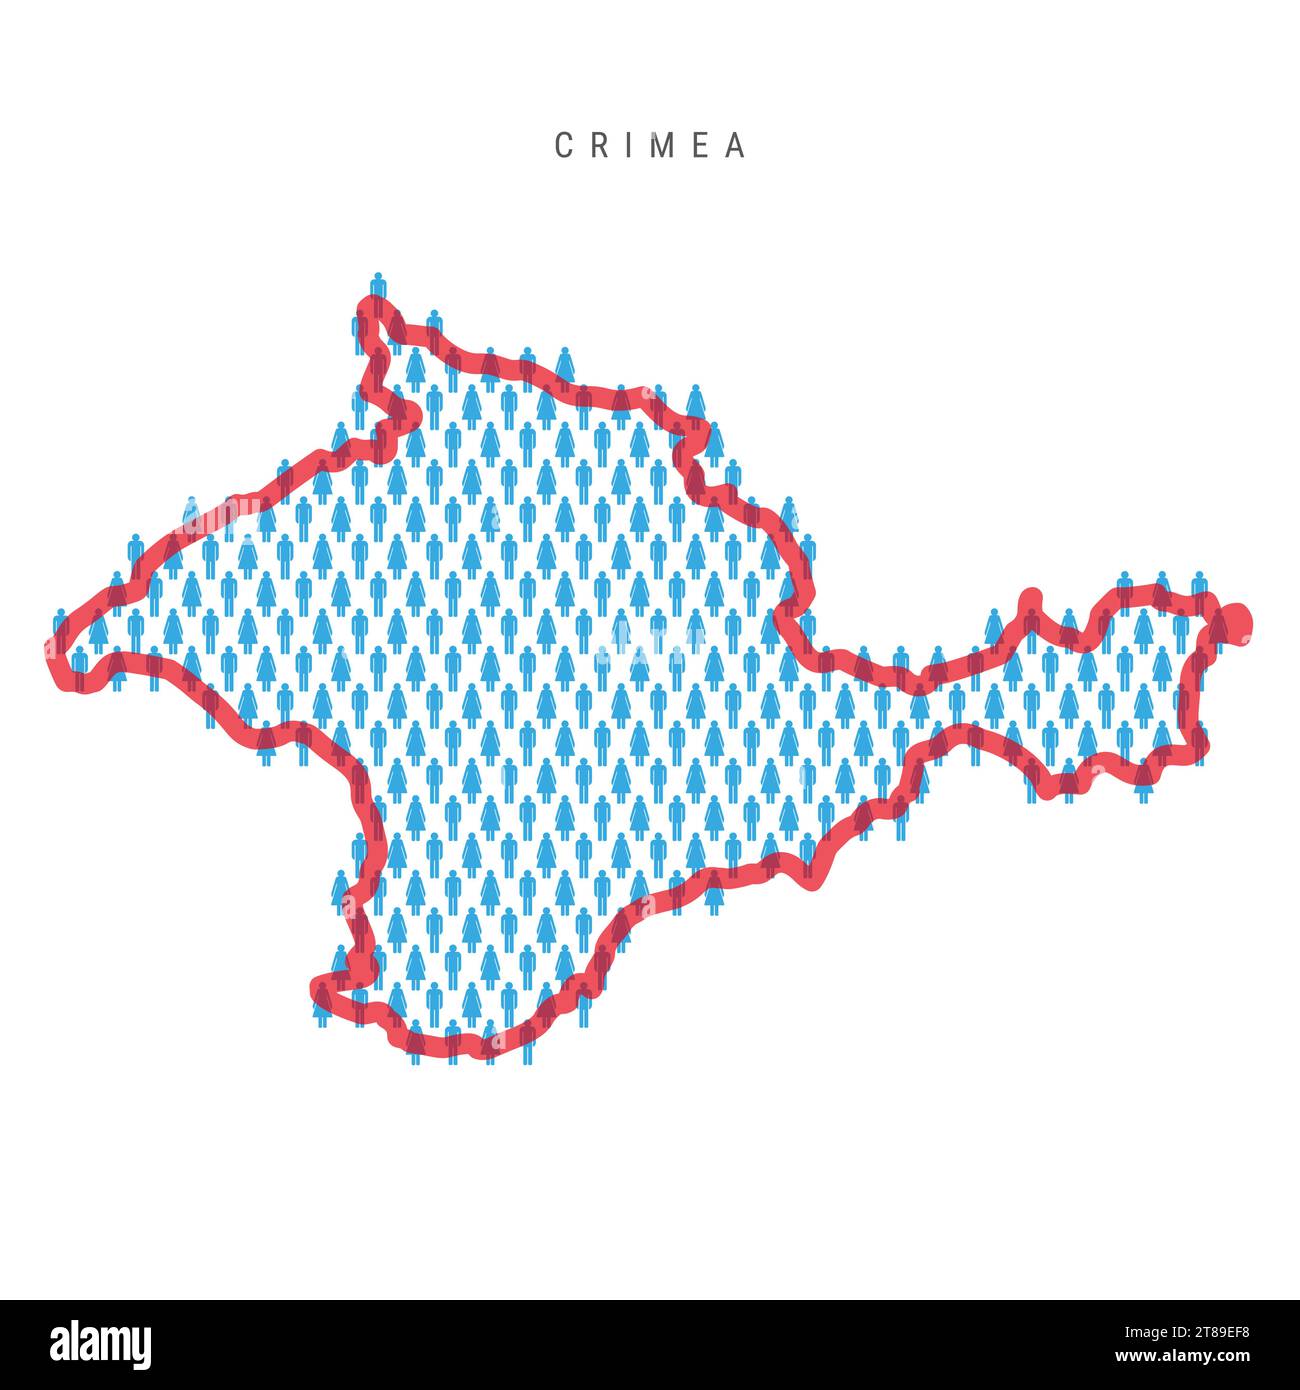 Crimea population map. Stick figures Crimean peninsula people map with bold red translucent country border. Pattern of men and women icons. Isolated v Stock Vector